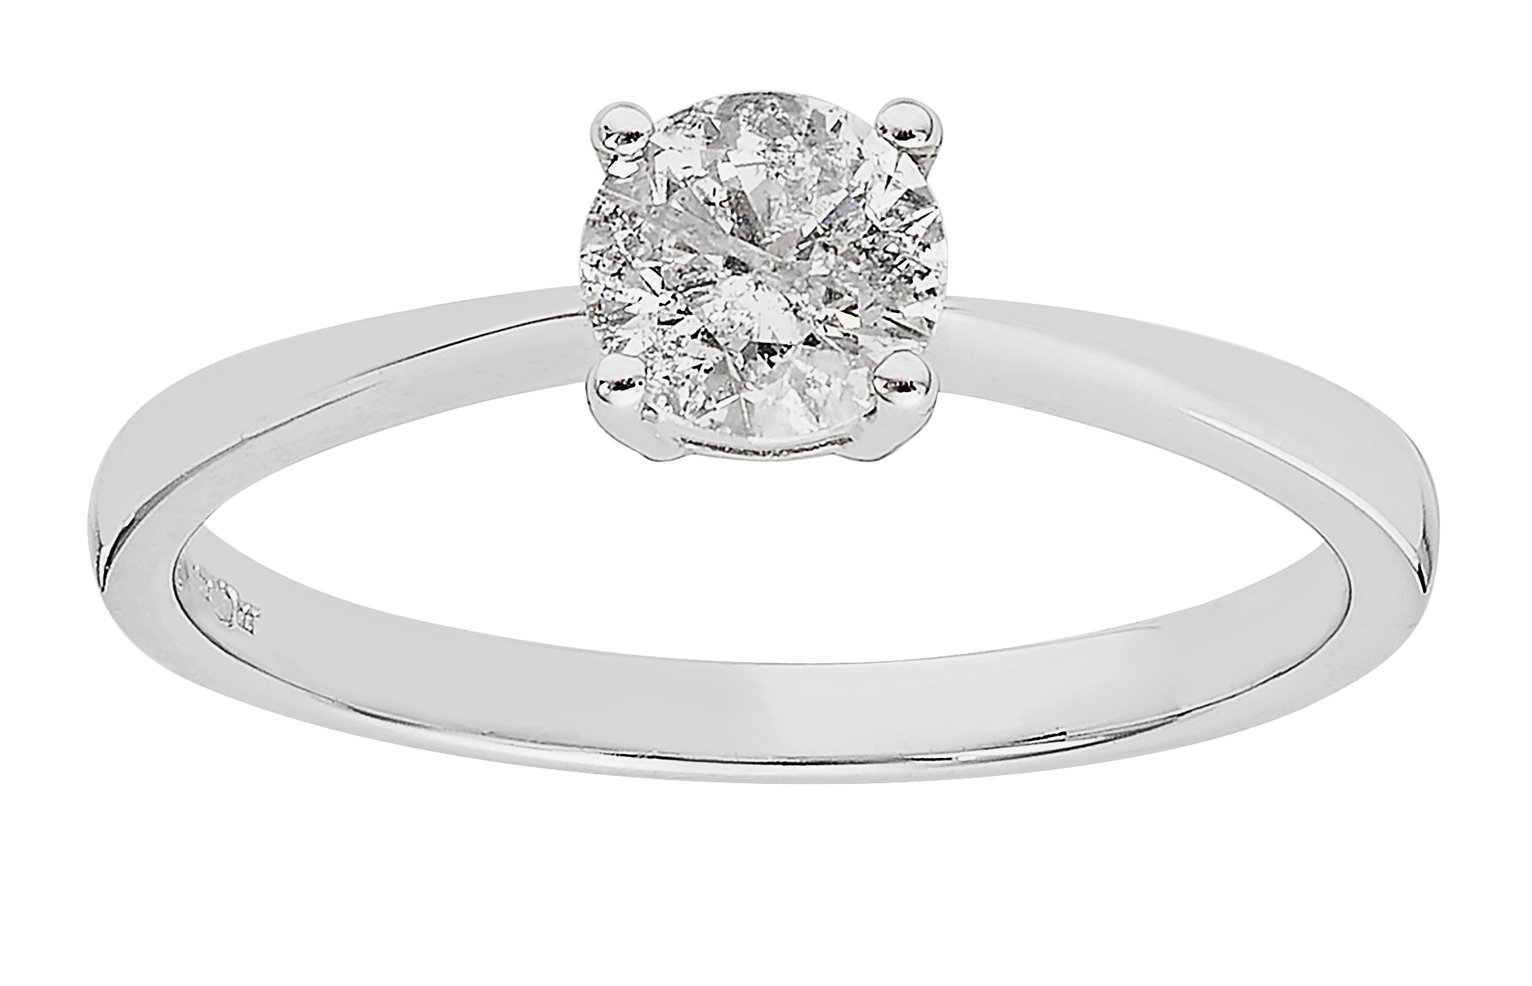 Revere 9ct White Gold 0.50ct Diamond Solitaire Ring Review